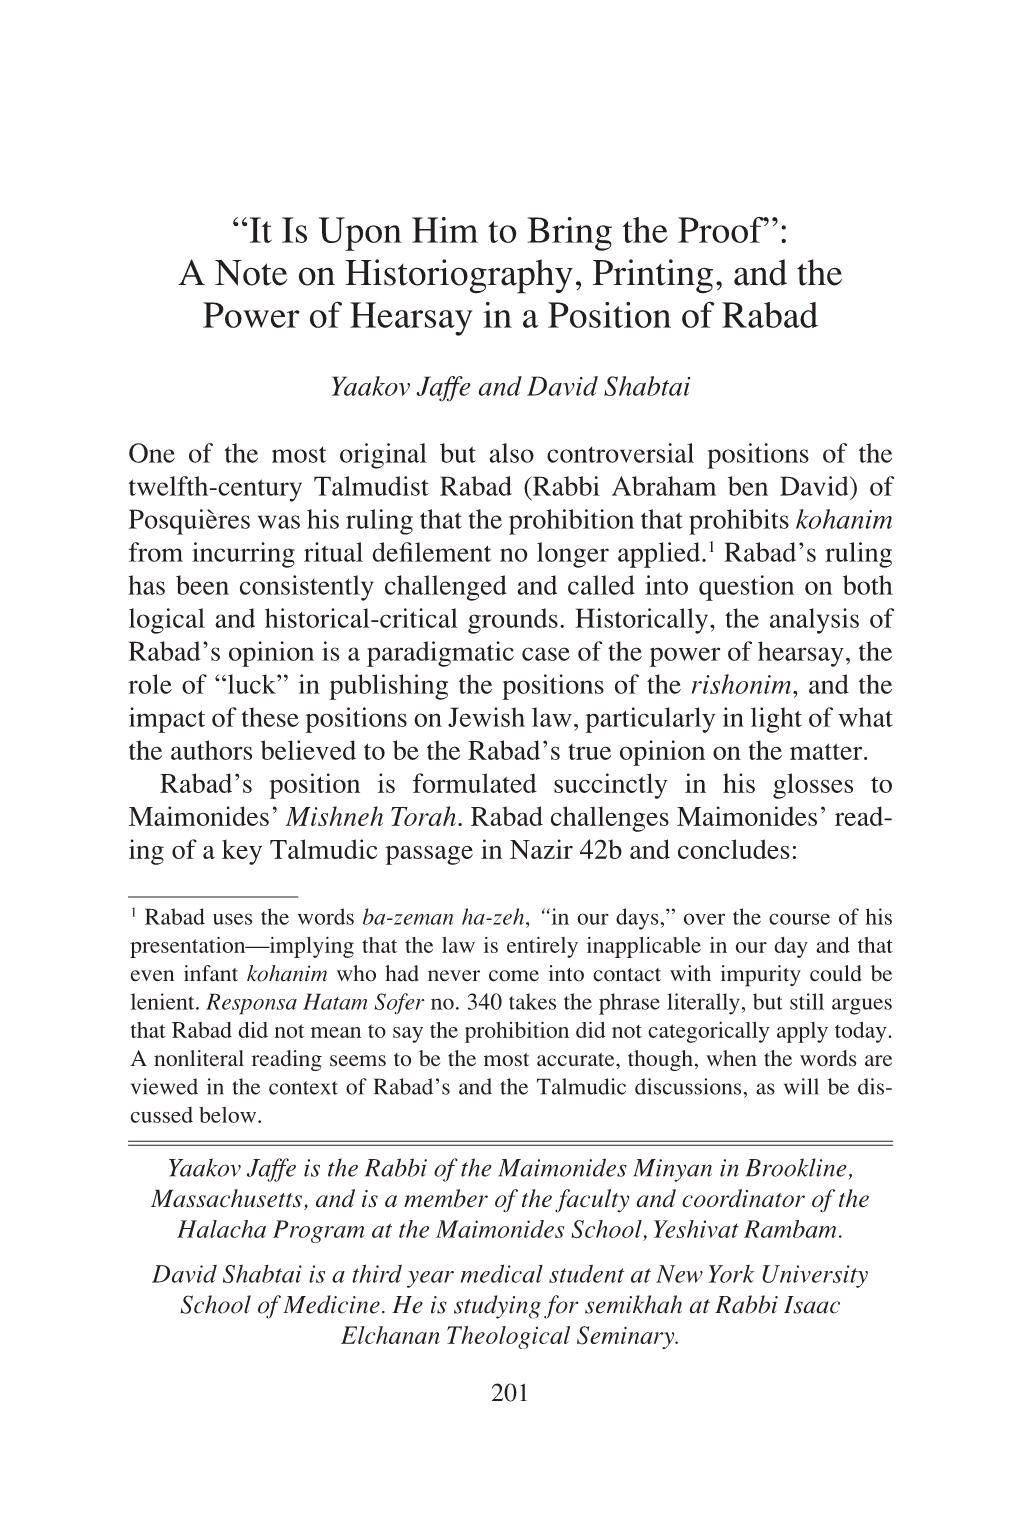 A Note on Historiography, Printing, and the Power of Hearsay in a Position of Rabad